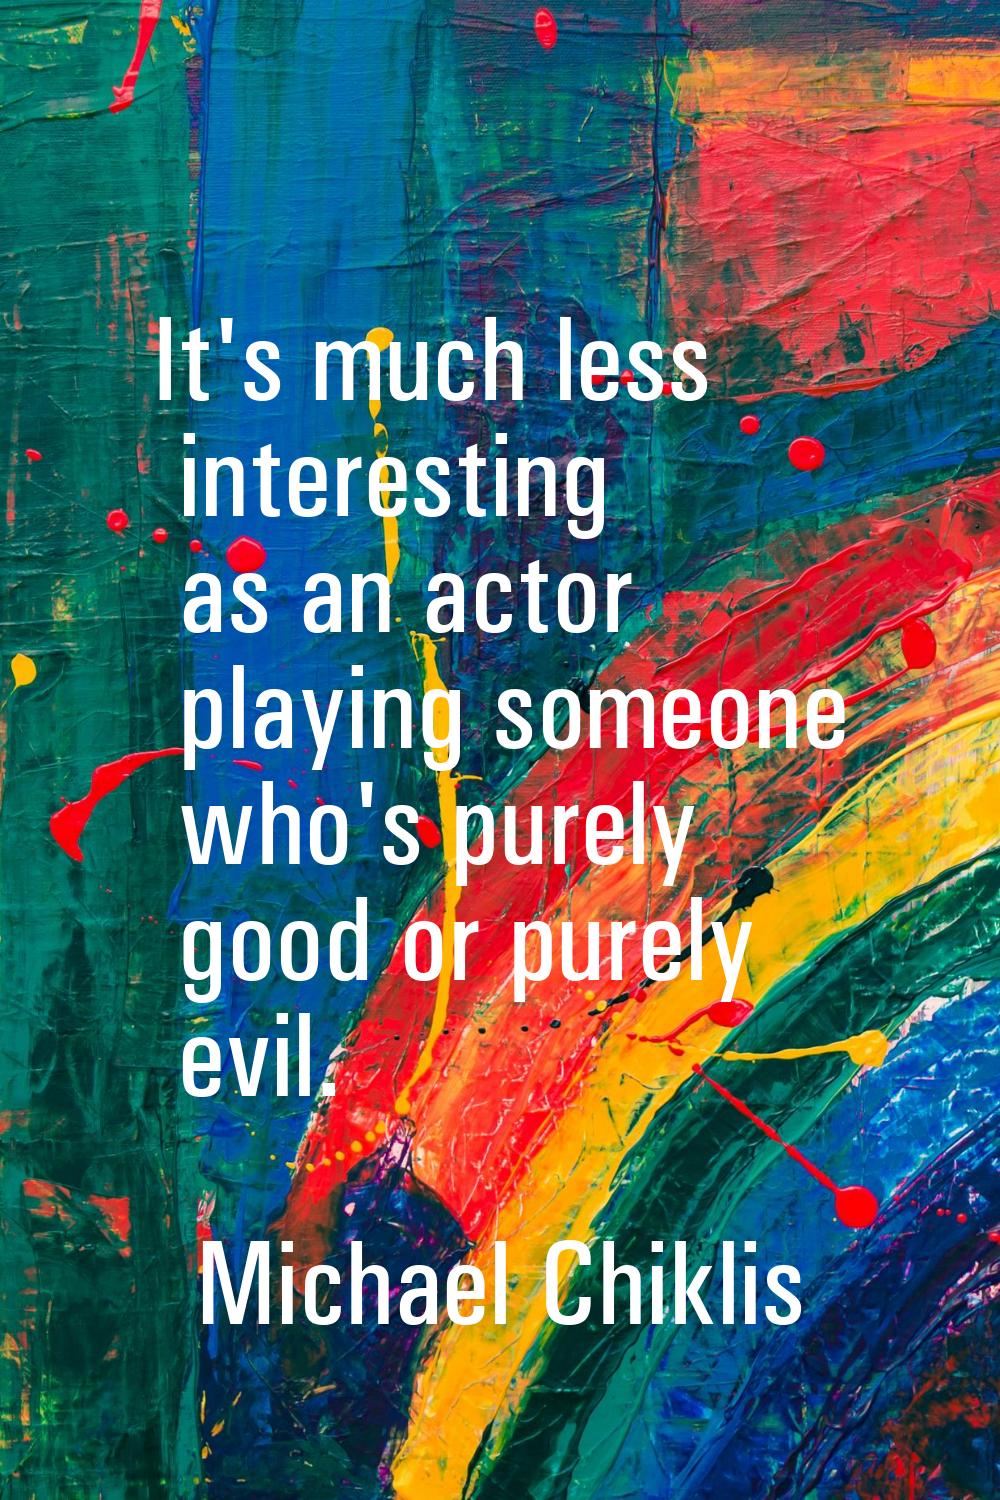 It's much less interesting as an actor playing someone who's purely good or purely evil.